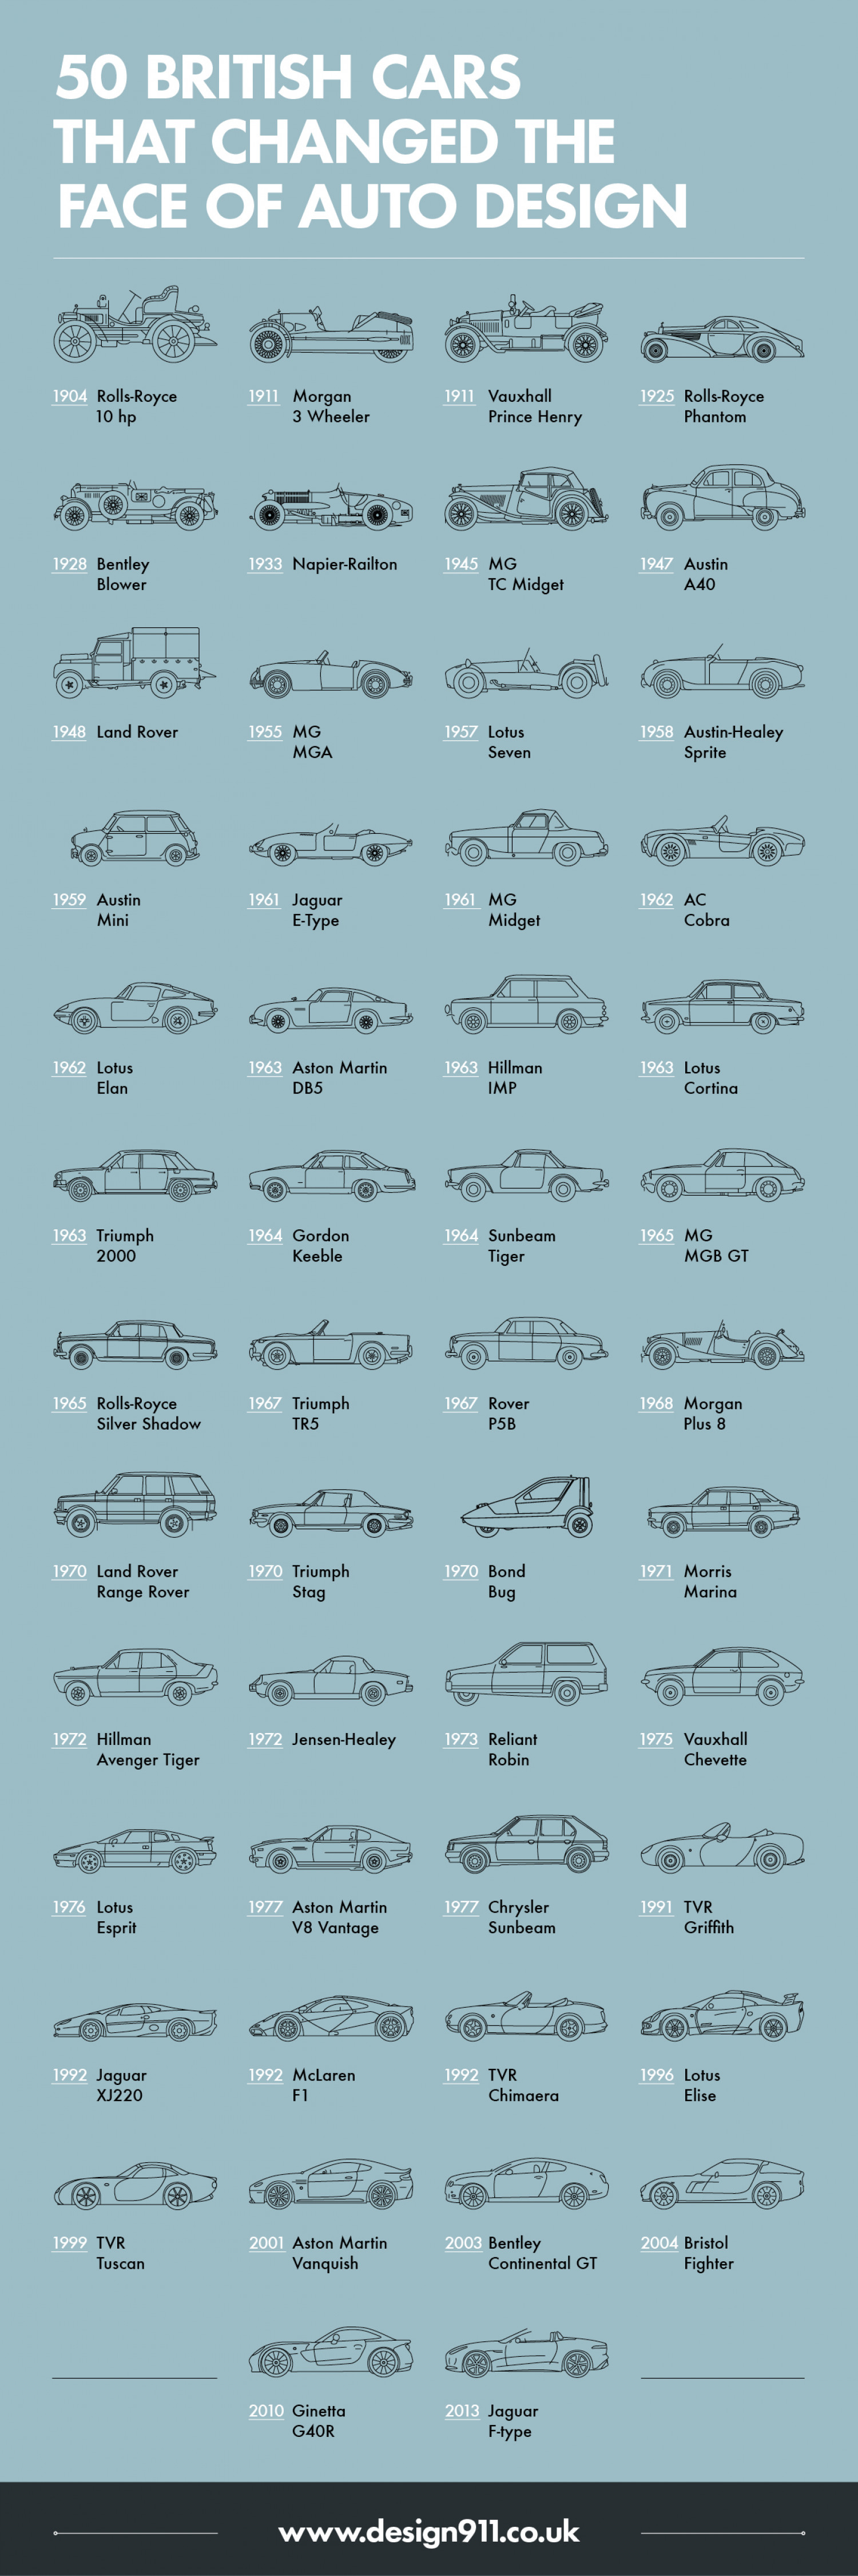 50 British Cars Which Changed The Face of Auto Design Infographic